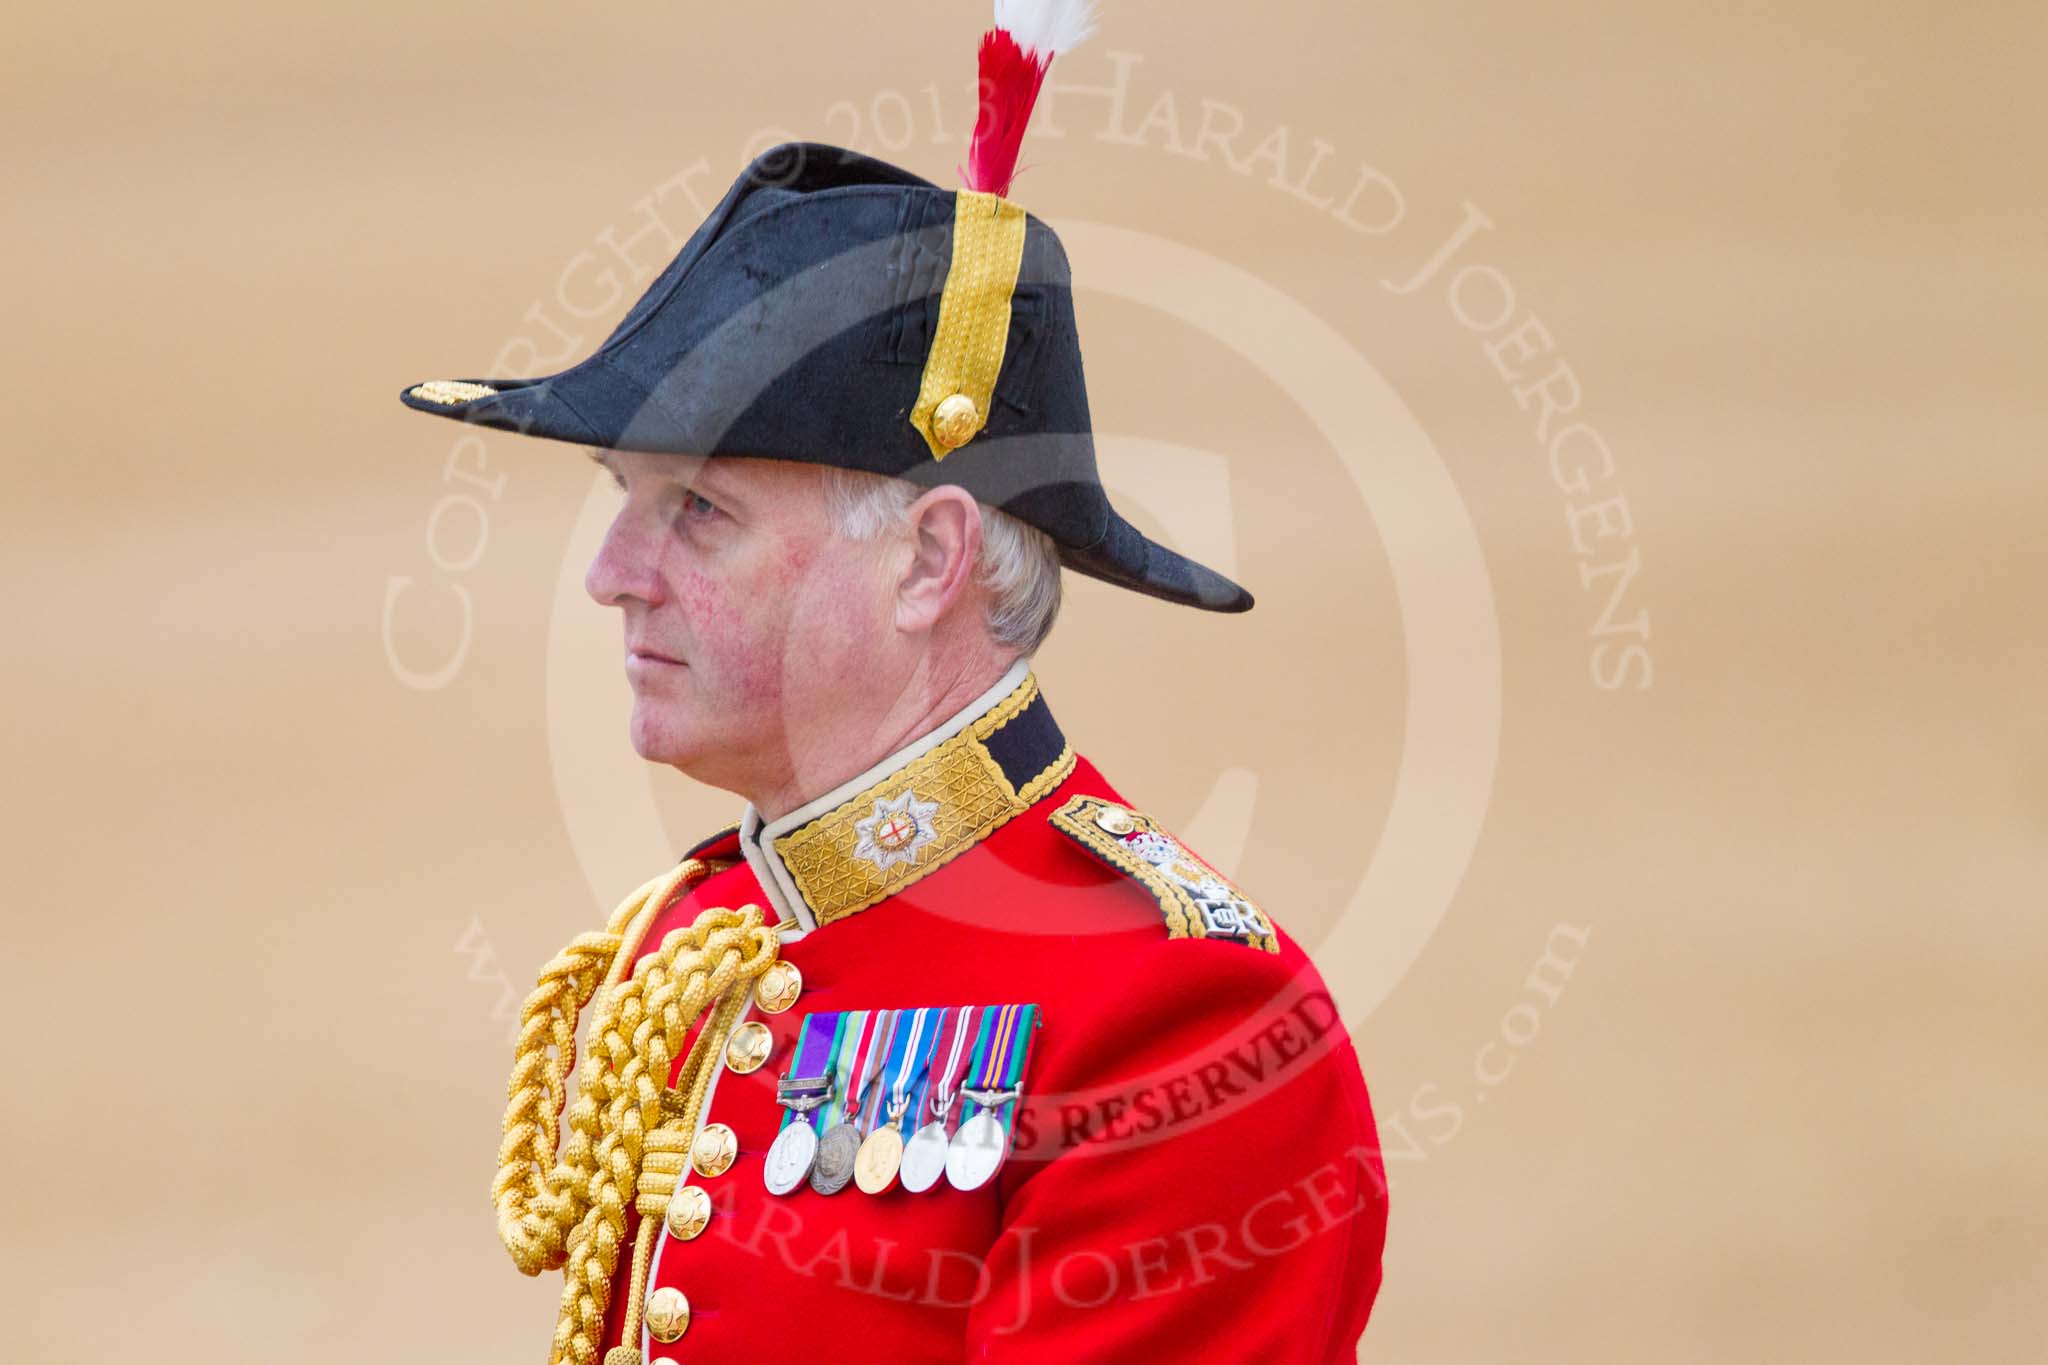 Trooping the Colour 2015. Image #266, 13 June 2015 11:00 Horse Guards Parade, London, UK